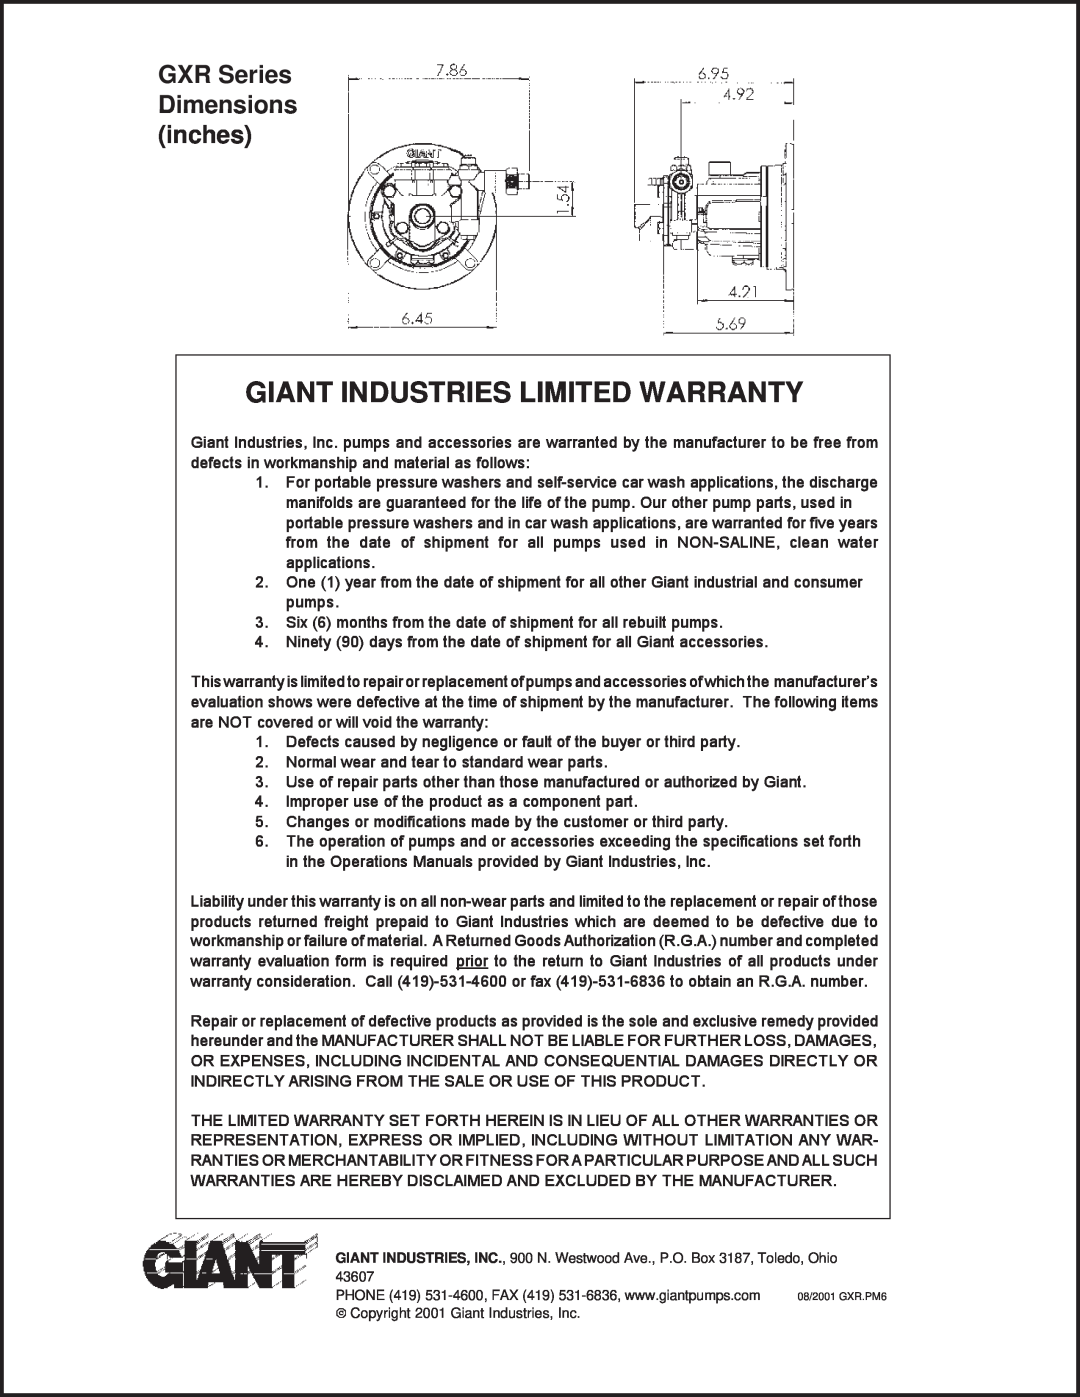 Giant installation instructions Giant Industries Limited Warranty, GXR Series Dimensions inches 